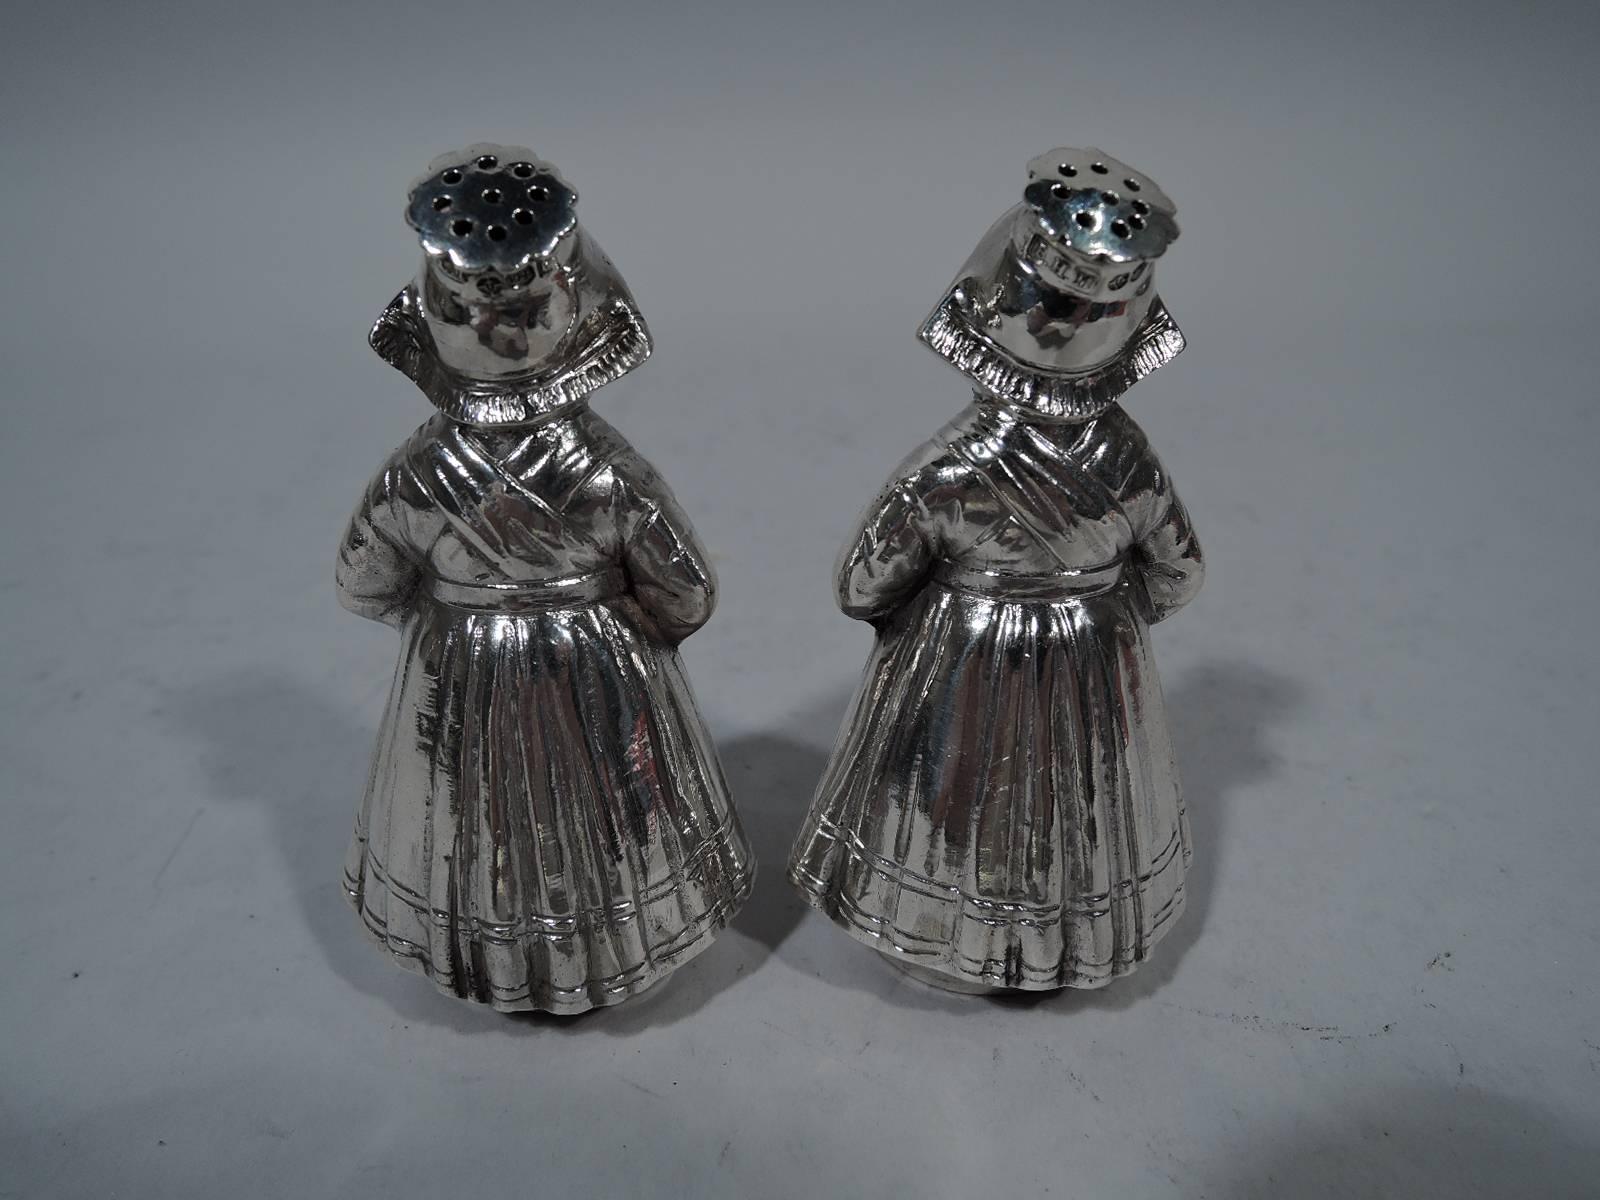 Pair of German sterling silver figural salt and pepper shakers, circa 1920. Each: A sturdy country girl in peaked cap and wood shoes peeking out from under voluminous skirts. Cap top pierced and detachable. Hallmark includes mark for London importer